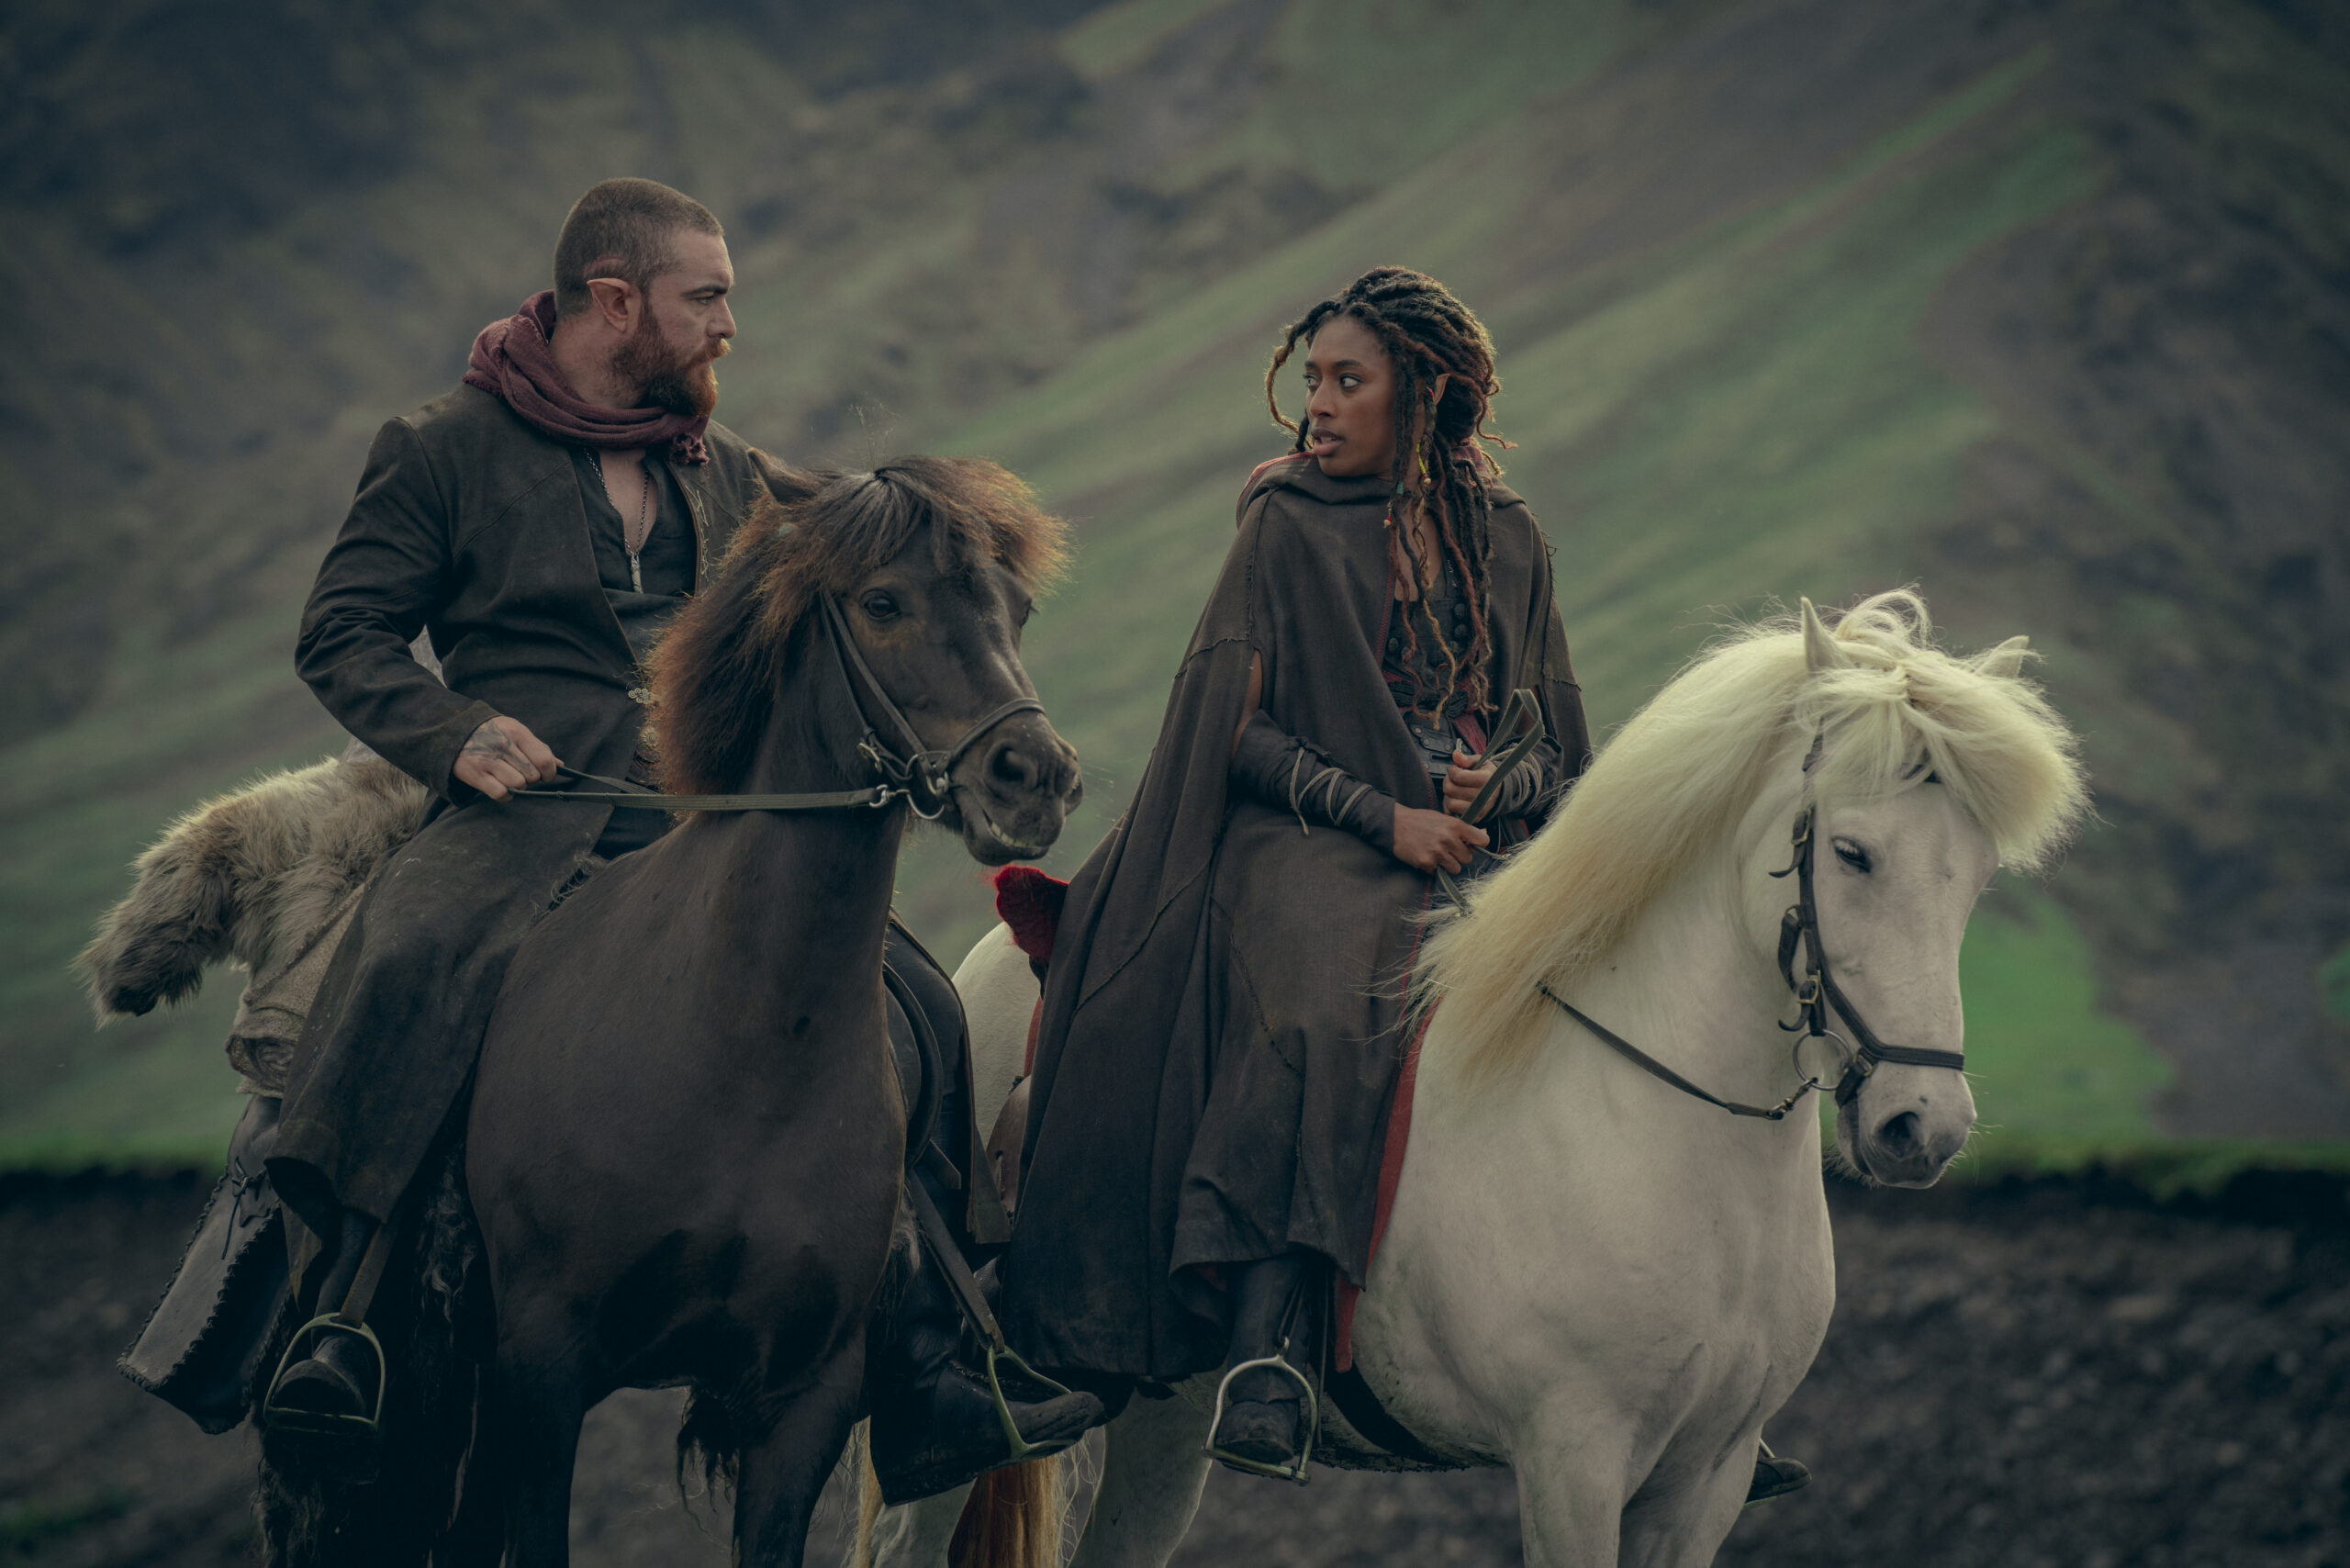 Laurence O’Fuarain as Fjall, Sophia Brown as Éile, in The Witcher: Blood Origin (2022) via Netflix